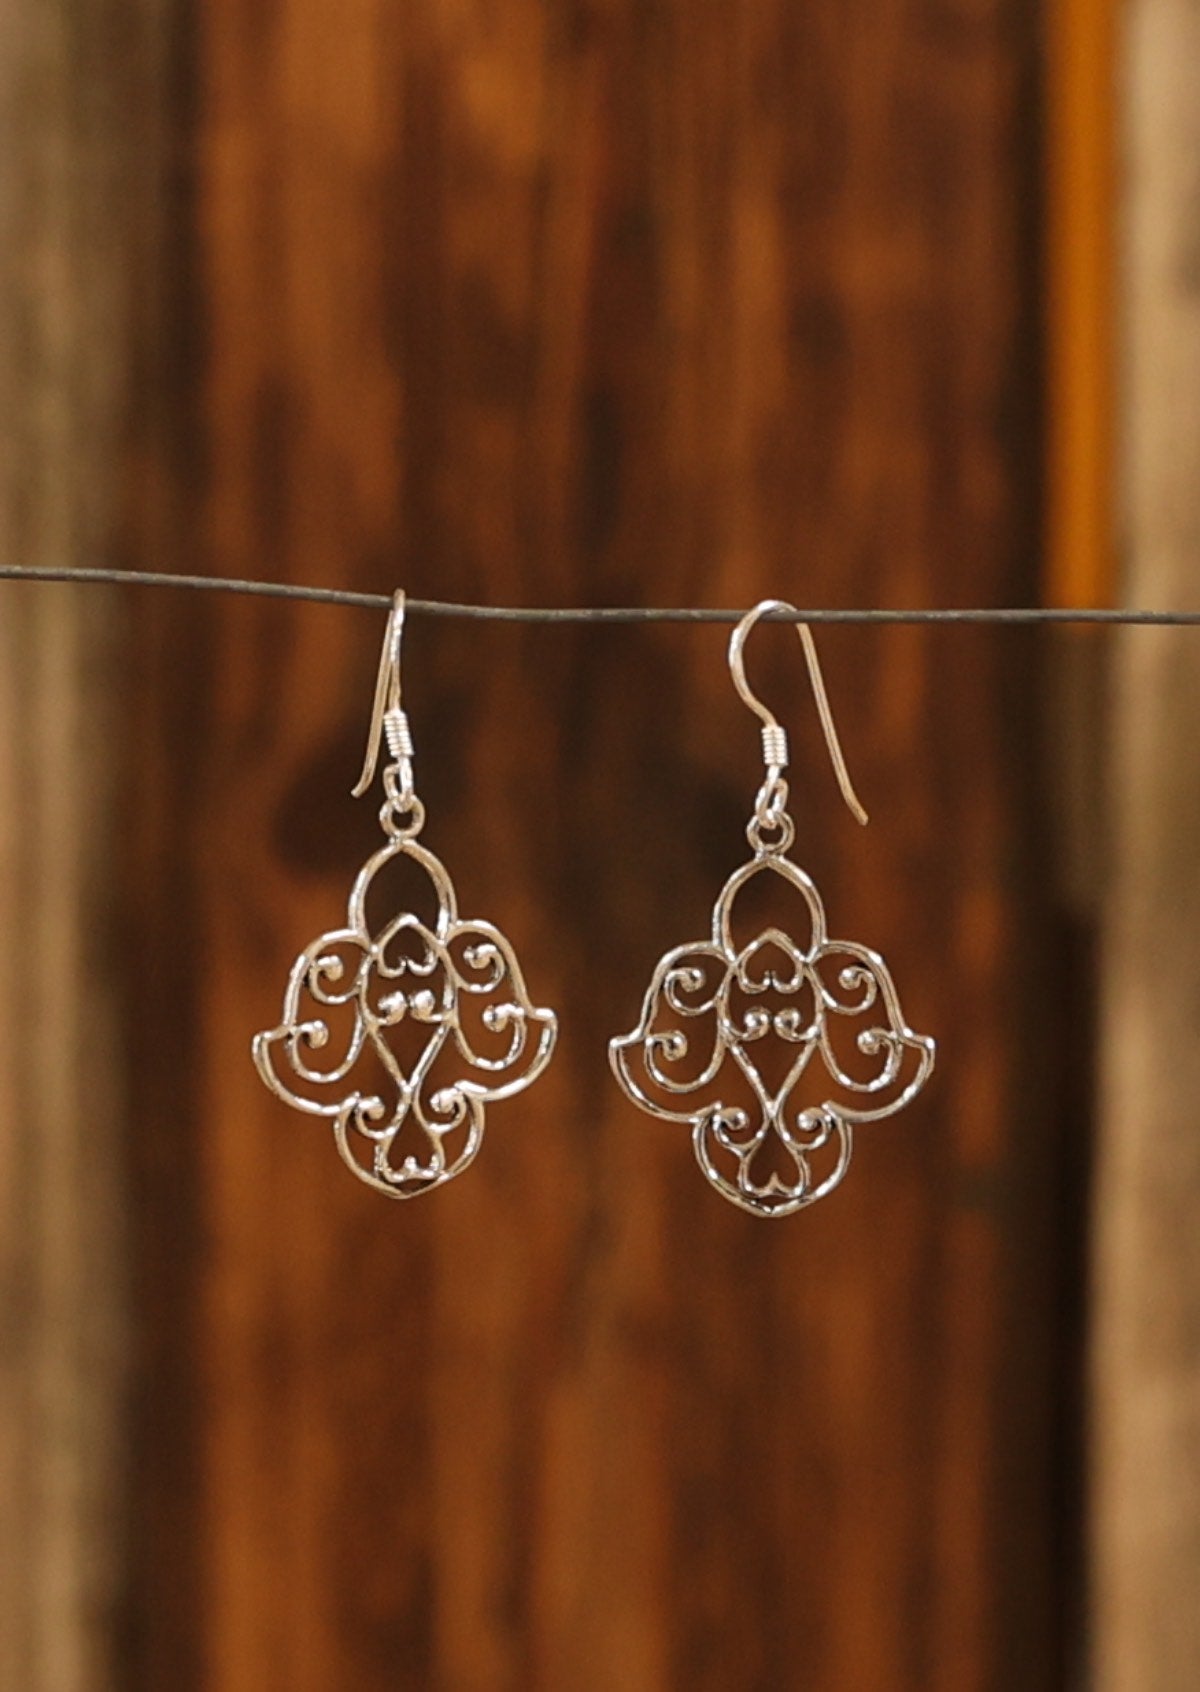 Silver filigree earrings measuring 22mm wide and 40mm long